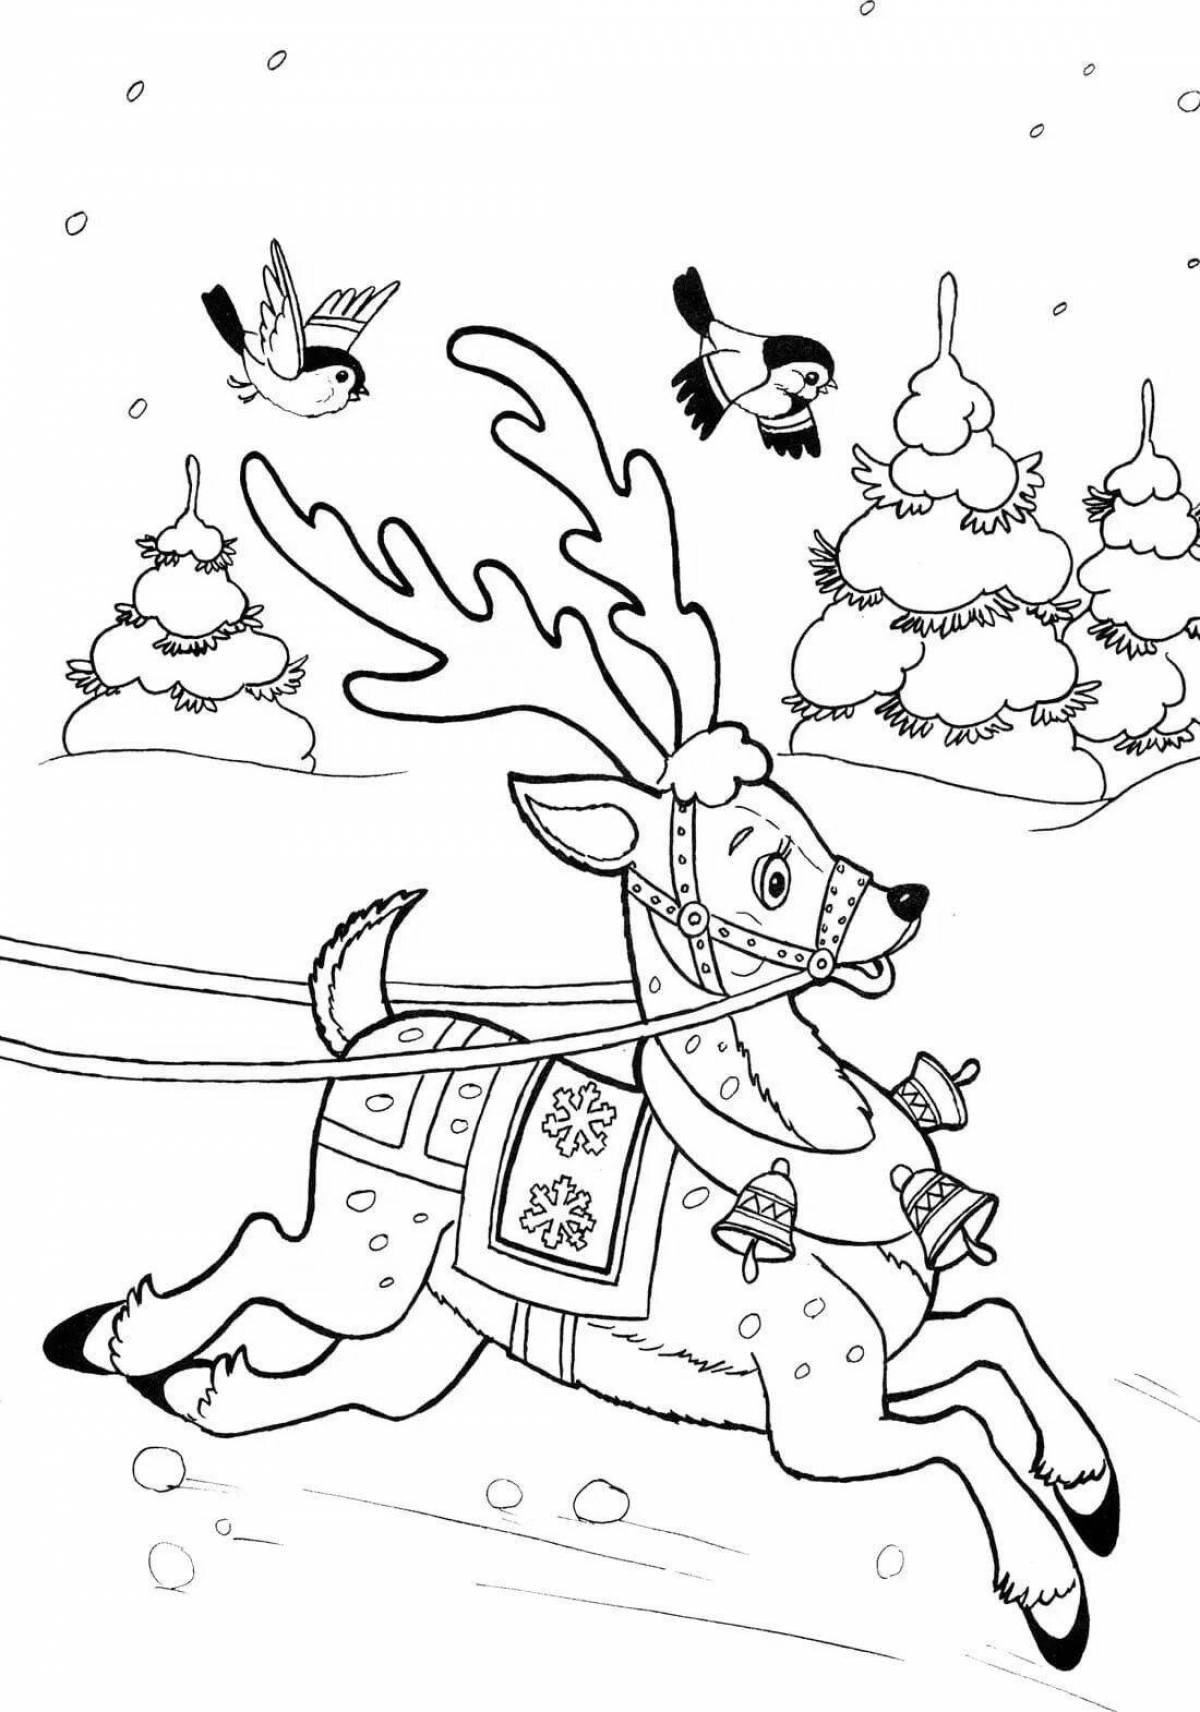 Violent coloring drawing of a winter fairy tale